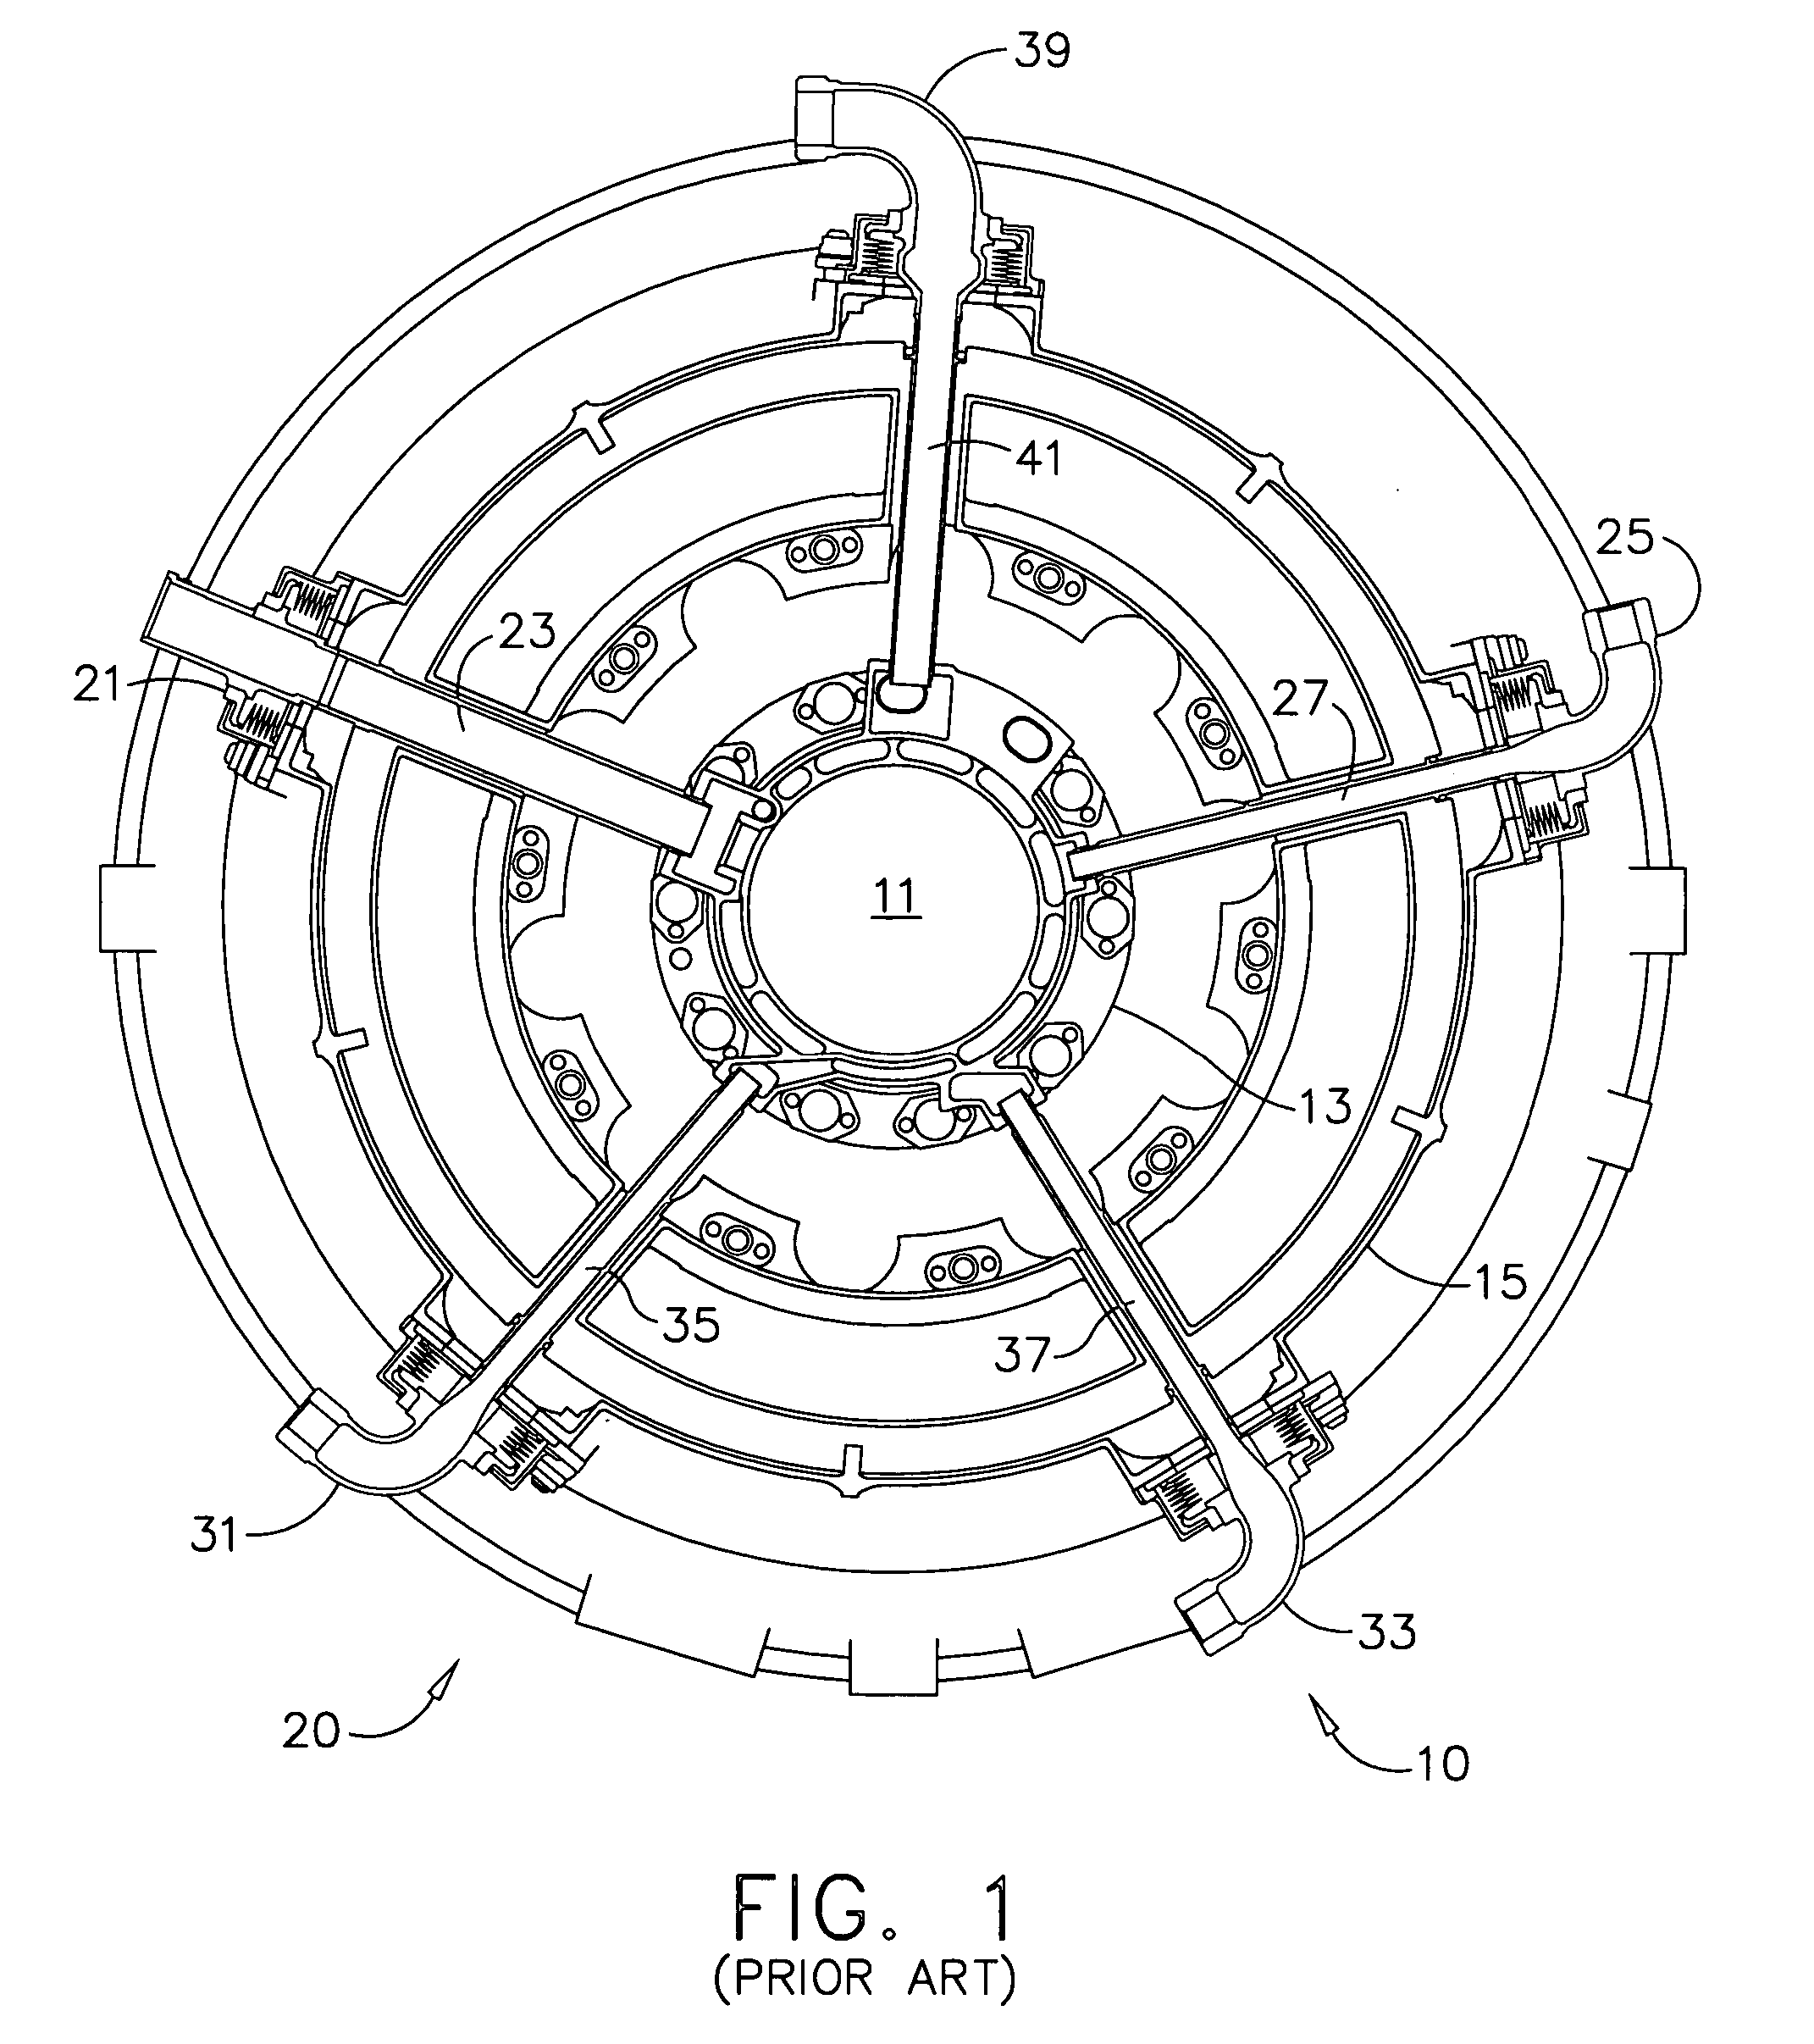 Apparatus and method for bearing lubrication in turbine engines